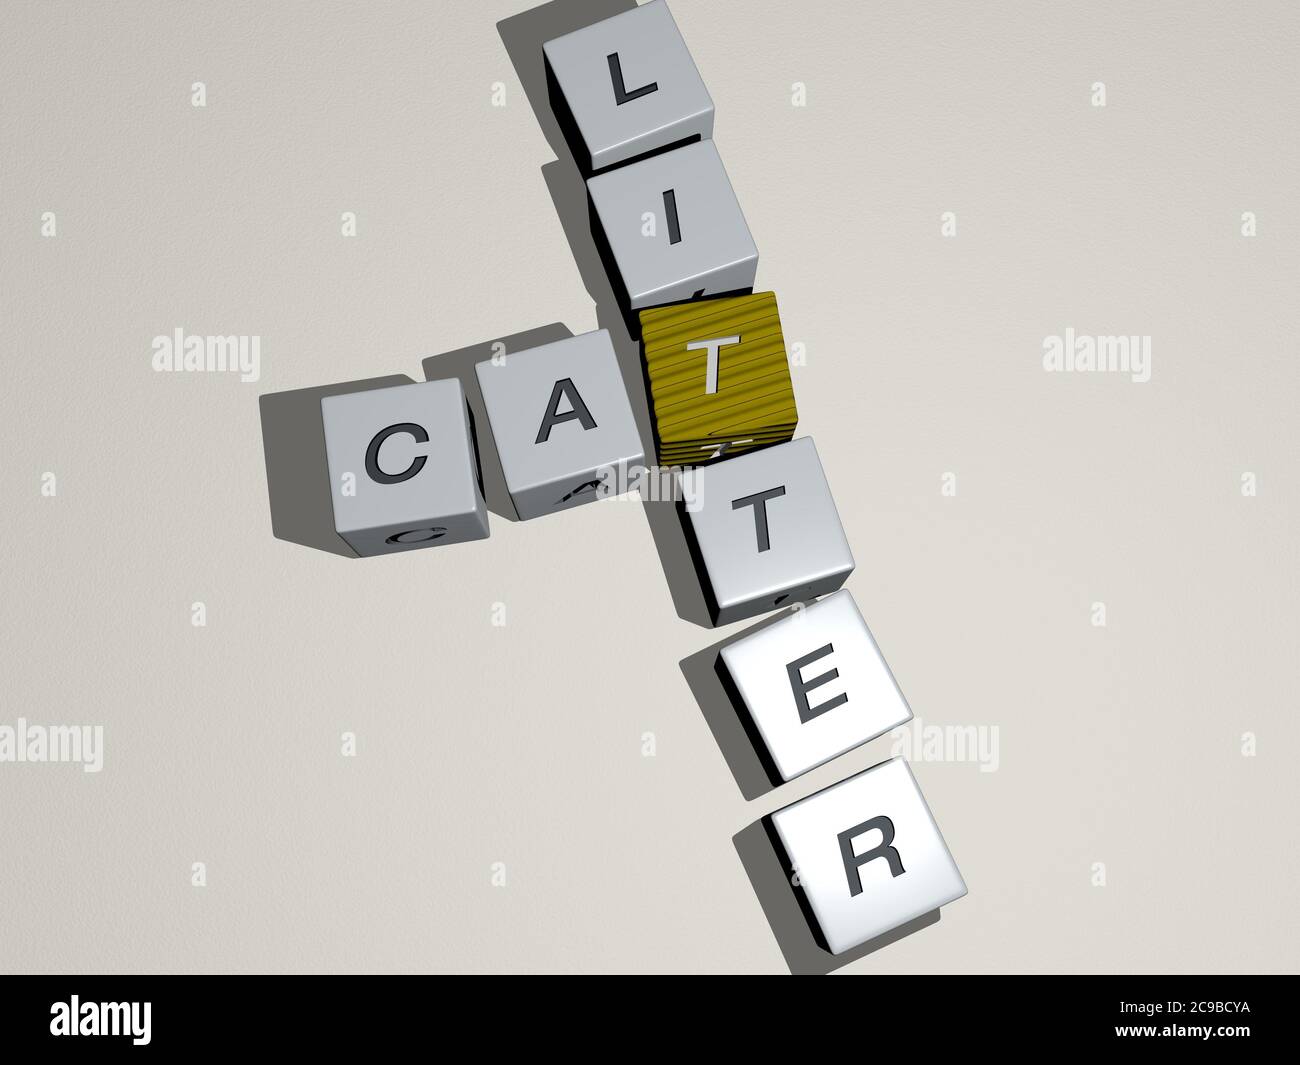 crosswords of cats: cat litter arranged by cubic letters on a mirror floor, concept meaning and presentation. animal and illustration. 3D illustration Stock Photo